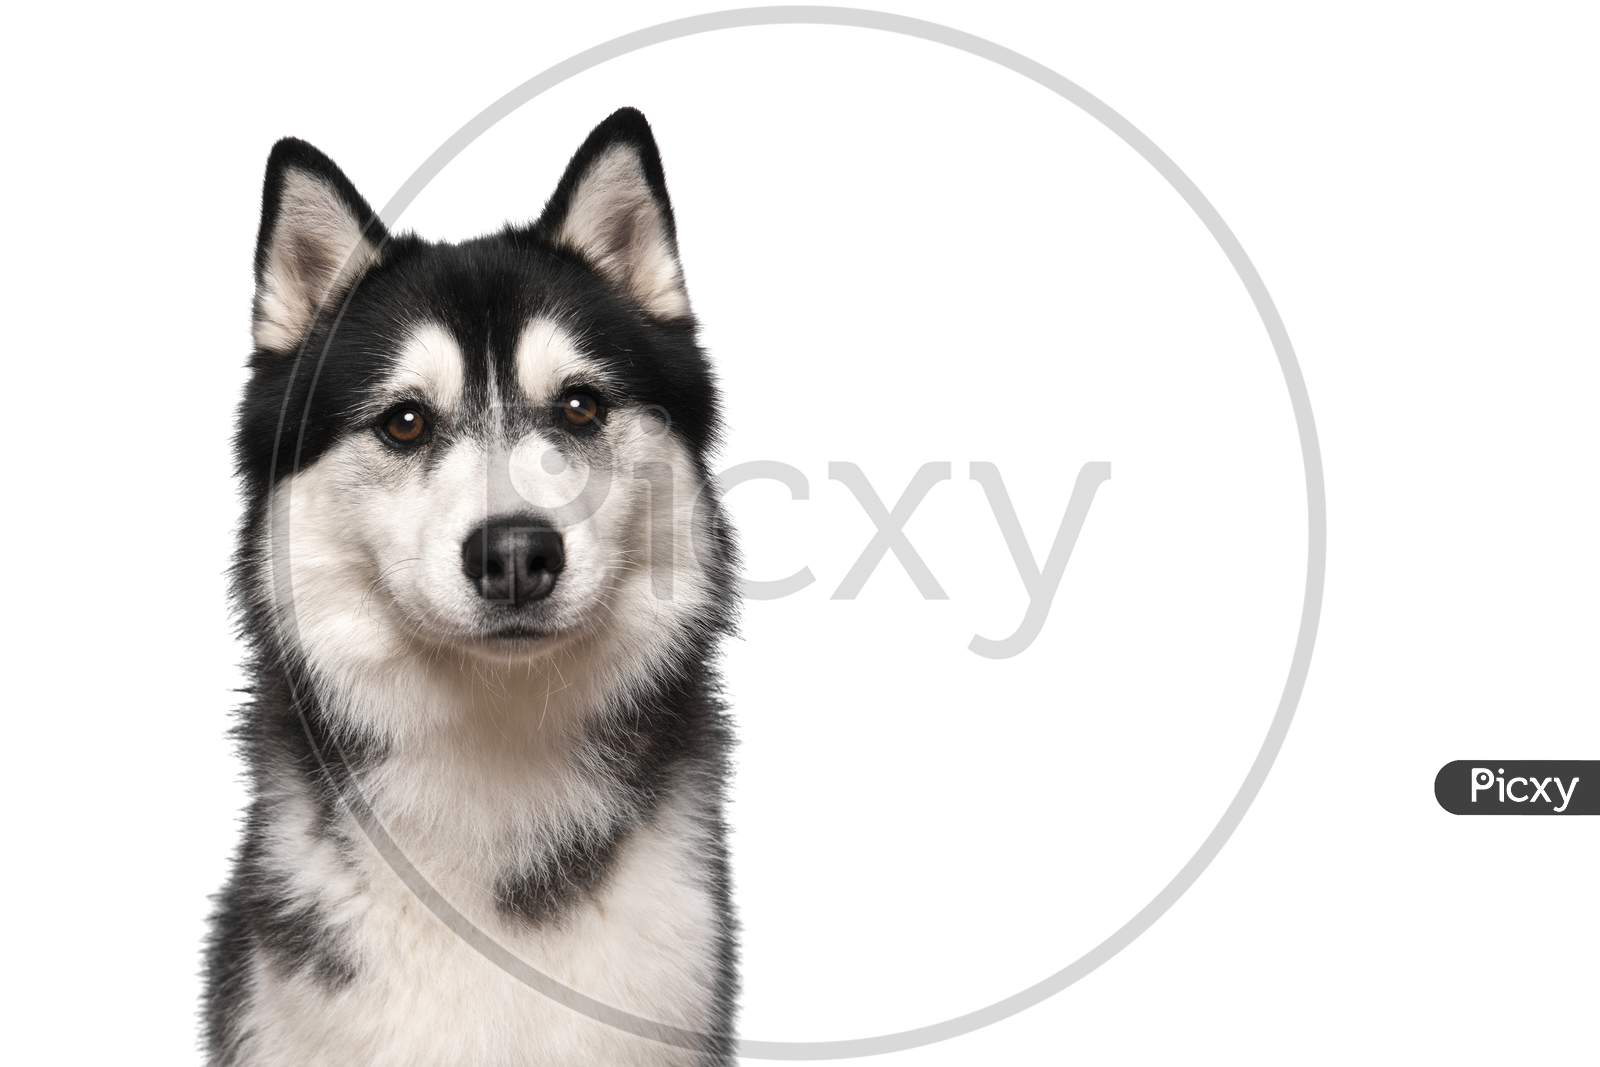 Portrait Of A Siberian Husky Looking At The Camera On A White Background